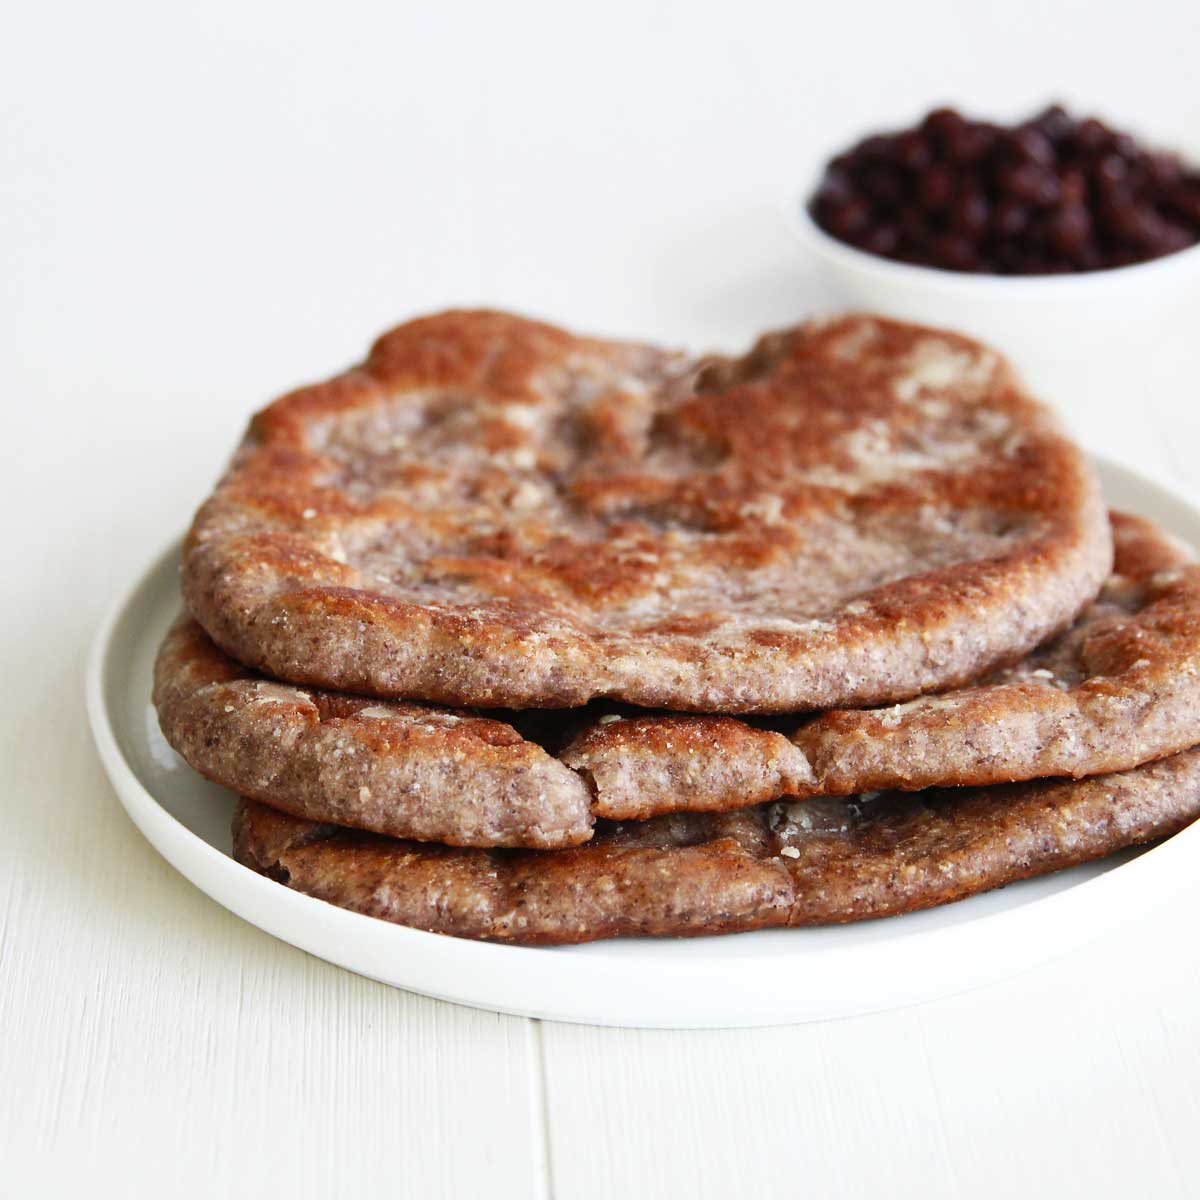 Black Bean Naan (Lower Carb Flatbread Made with Canned Black Beans) - Zucchini Flatbread